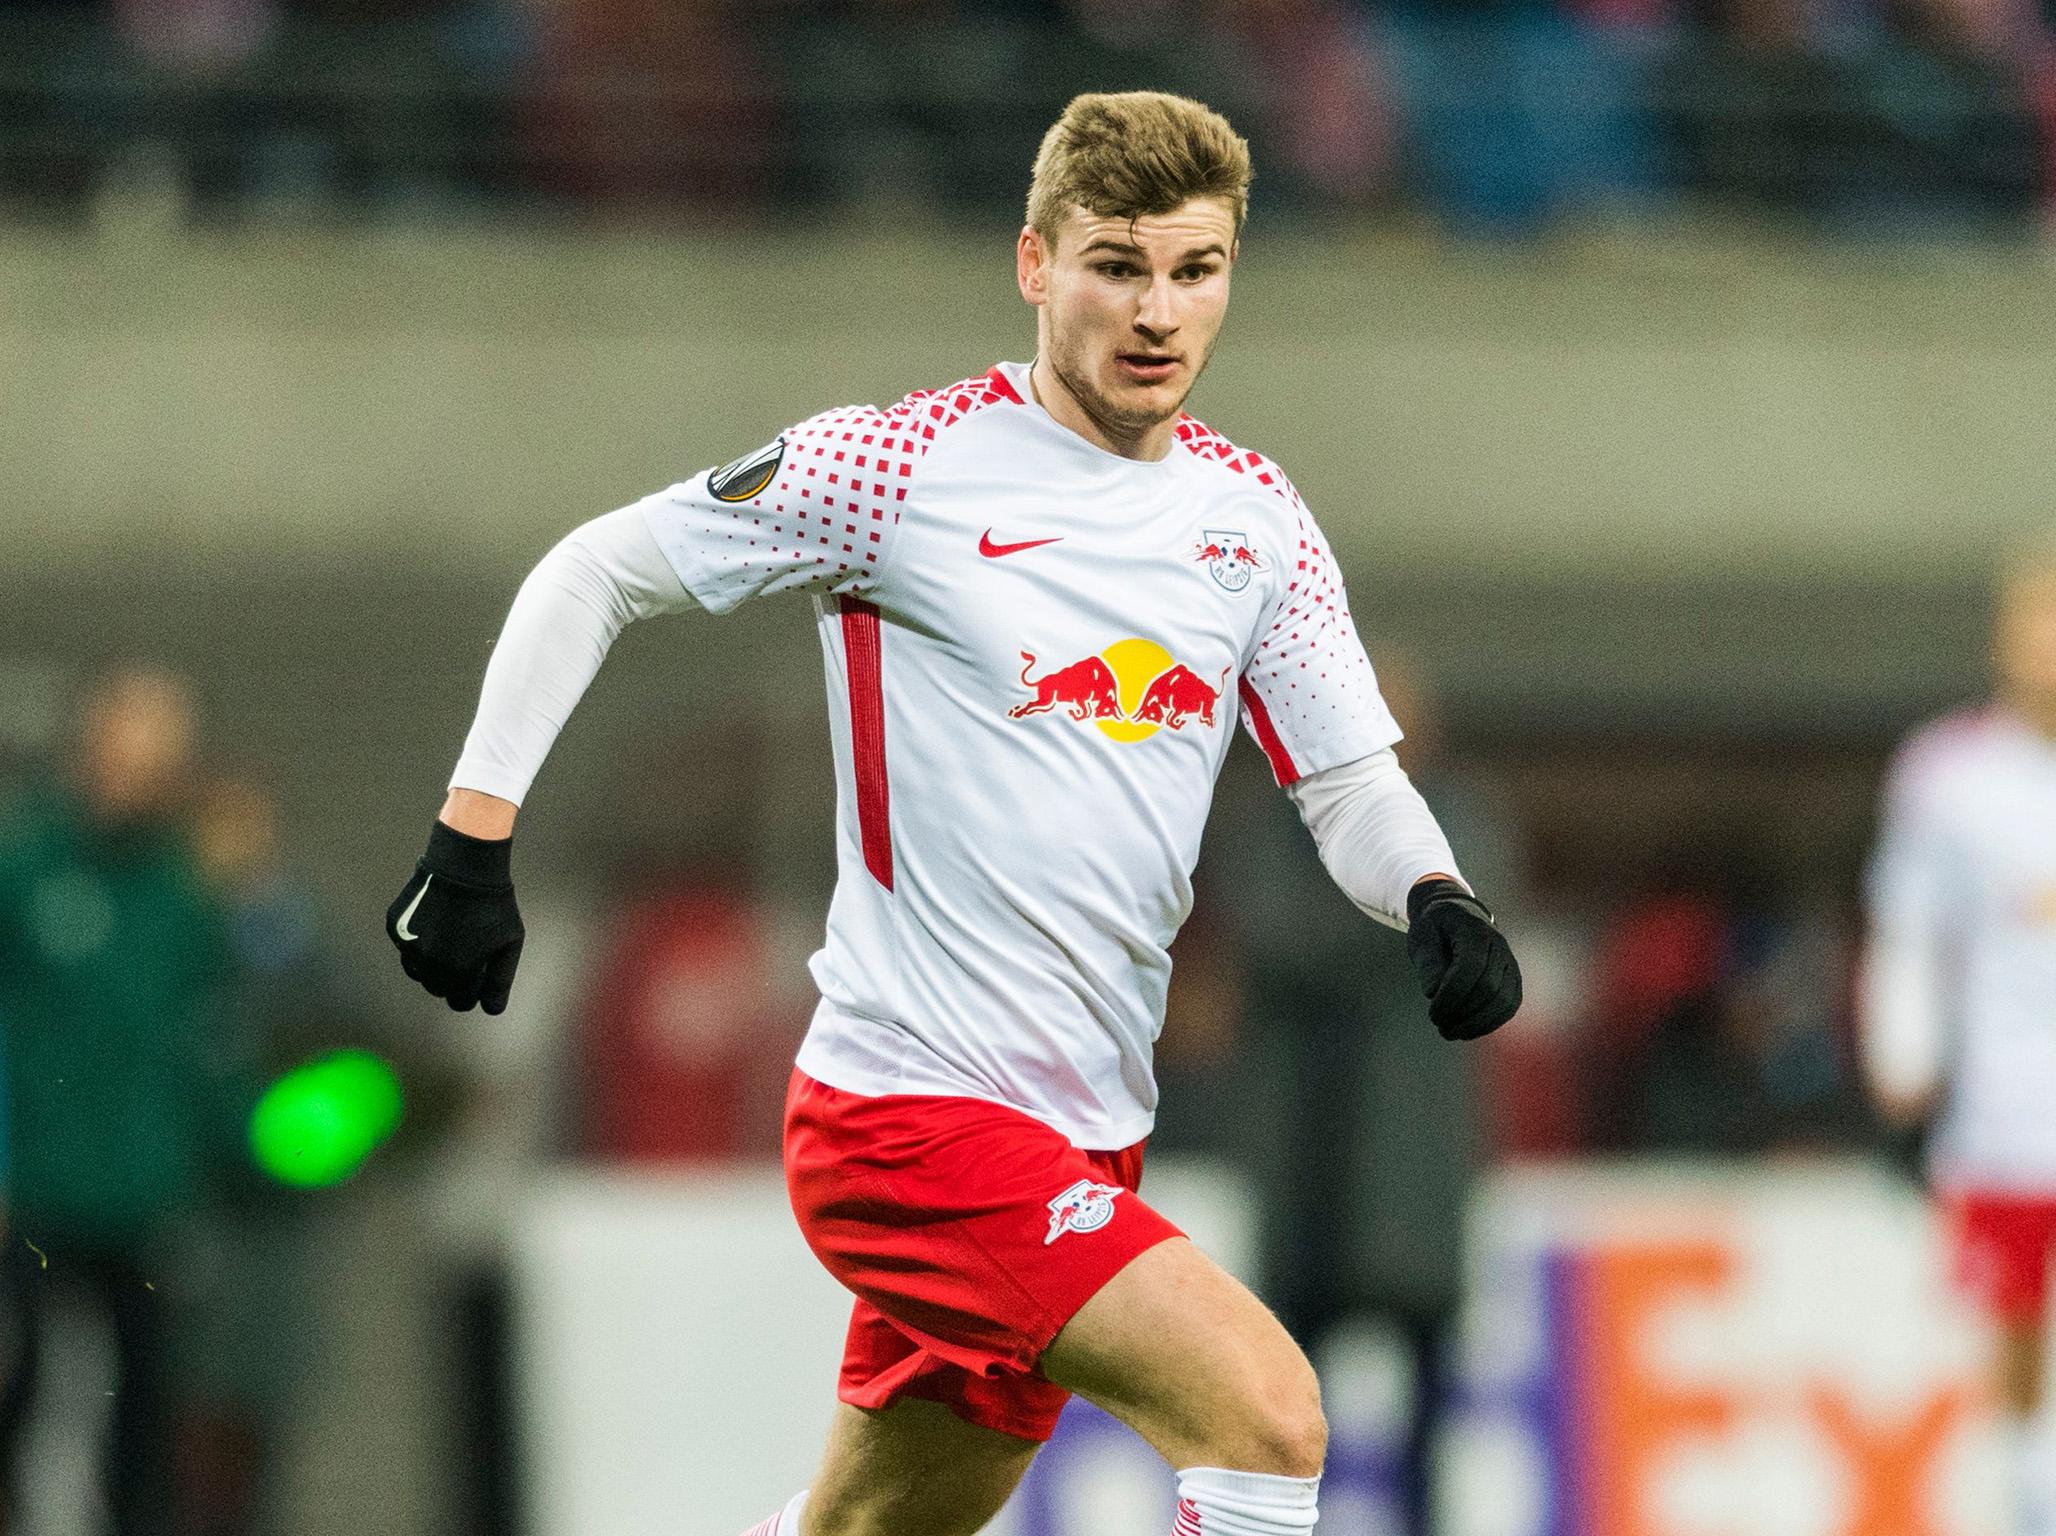 Timo Werner has 17 goals in 35 appearances this season